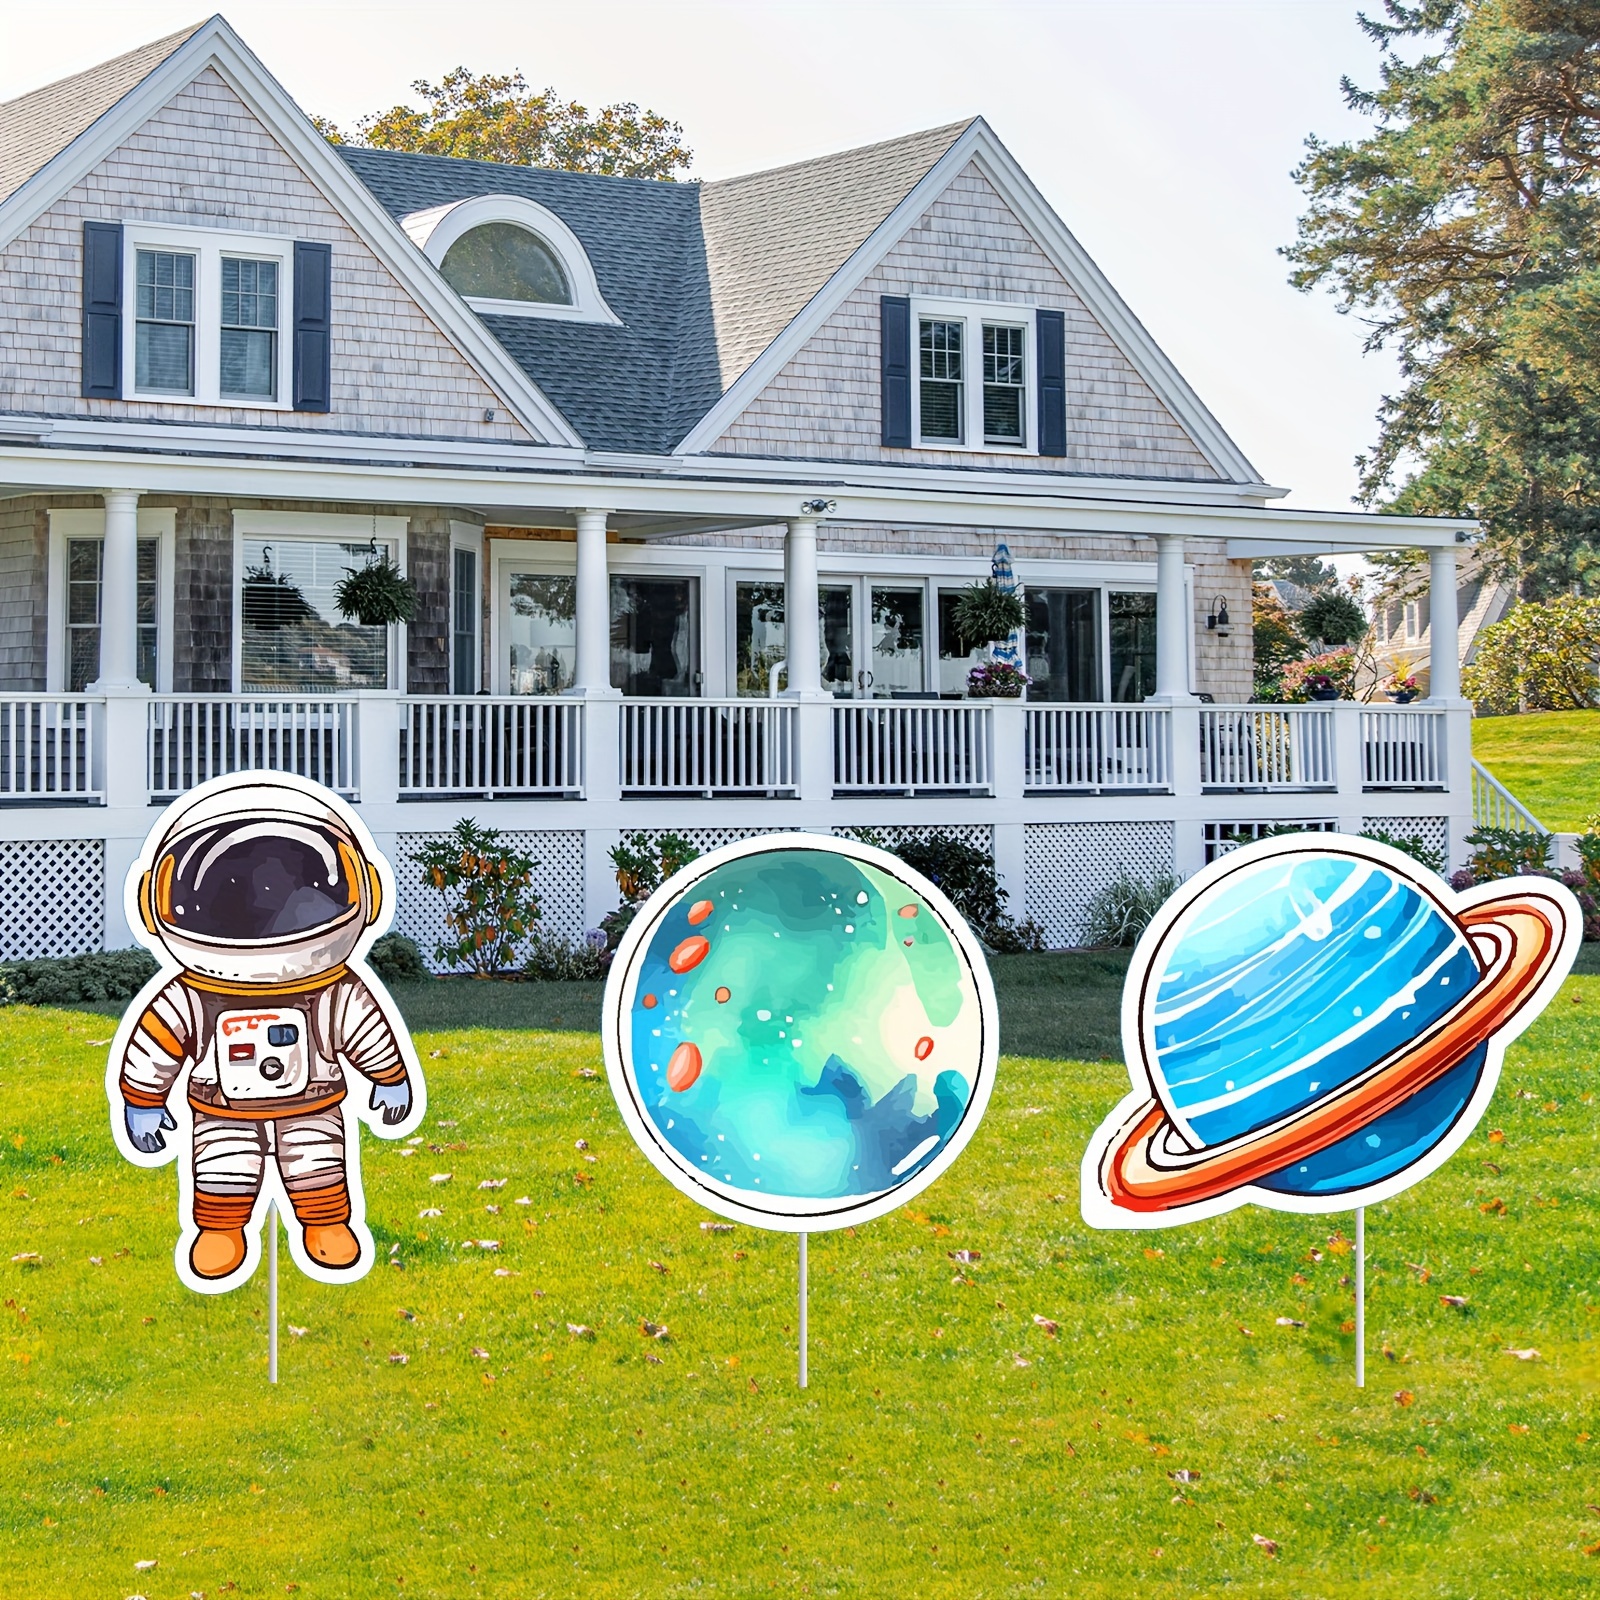 

Space-themed Astronaut And Planet Yard Sticks: Perfect For 1st Birthday Parties - Includes 3 Astronauts And 2 Planets With Sticks